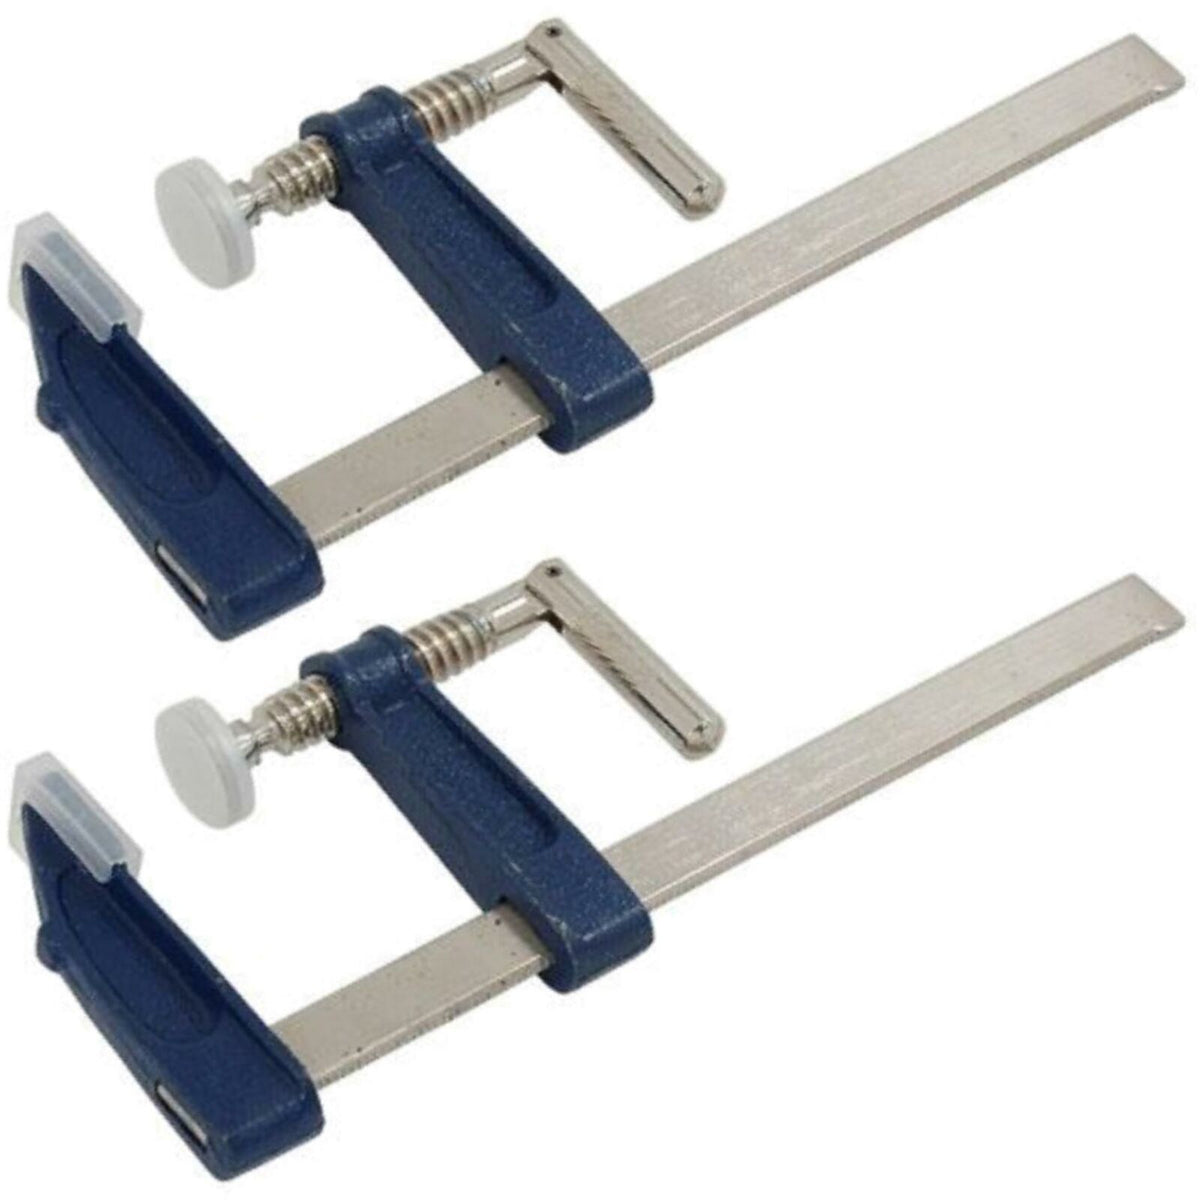 Neilsen 2pc F Clamps Wood Working 150mm Heavy Duty Cast Iron Metal clamp 6"